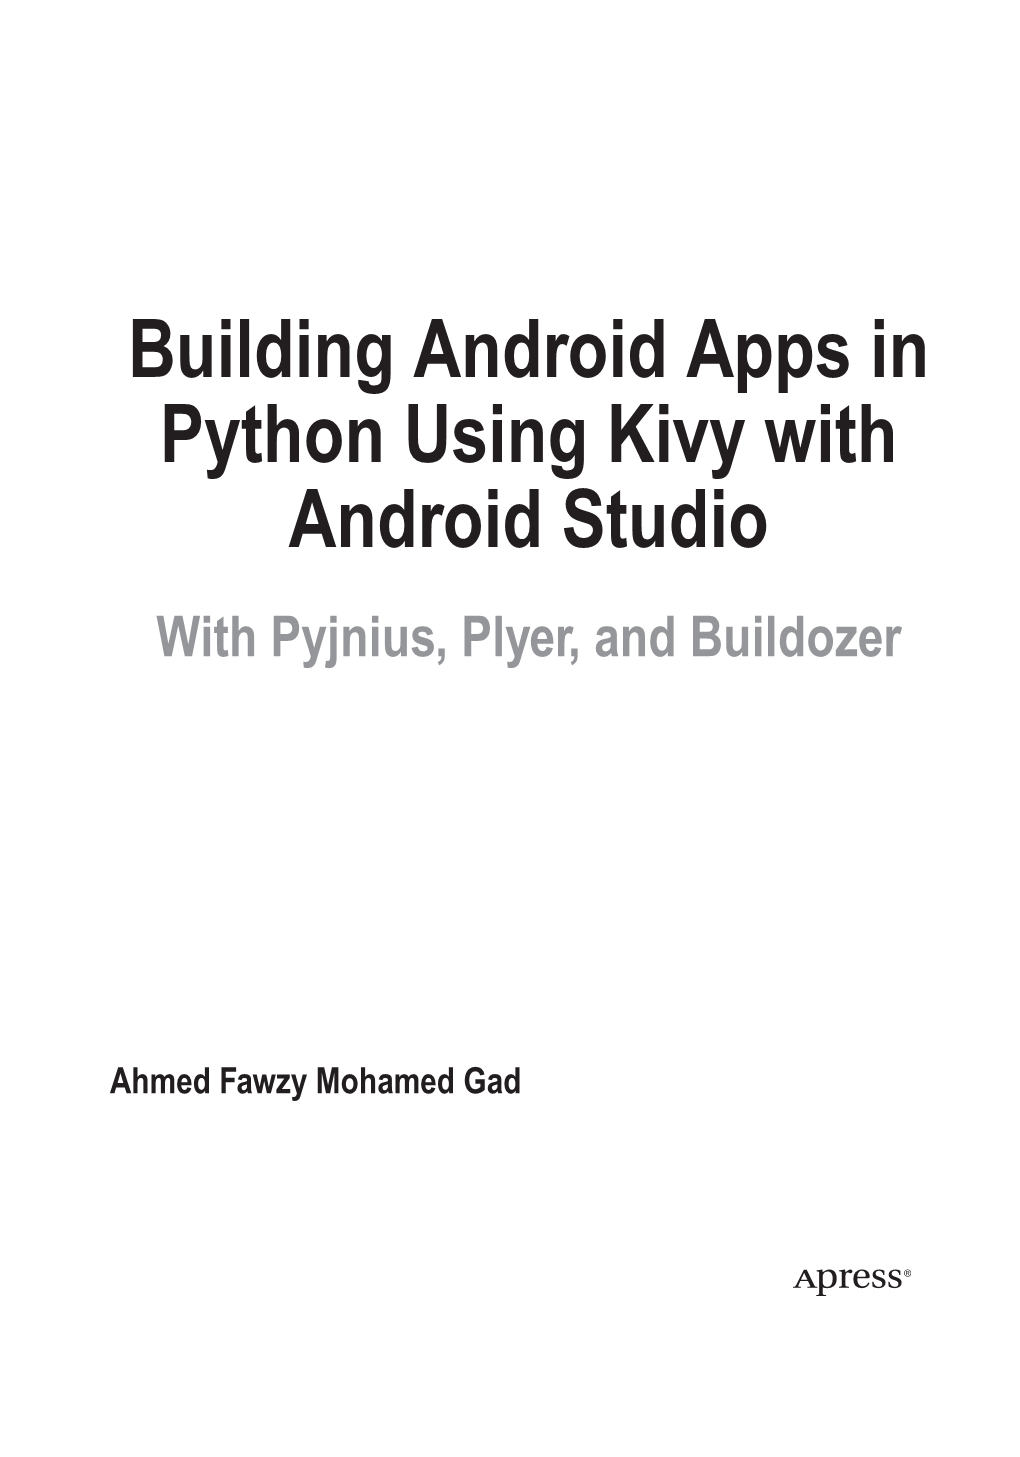 Building Android Apps in Python Using Kivy with Android Studio with Pyjnius, Plyer, and Buildozer